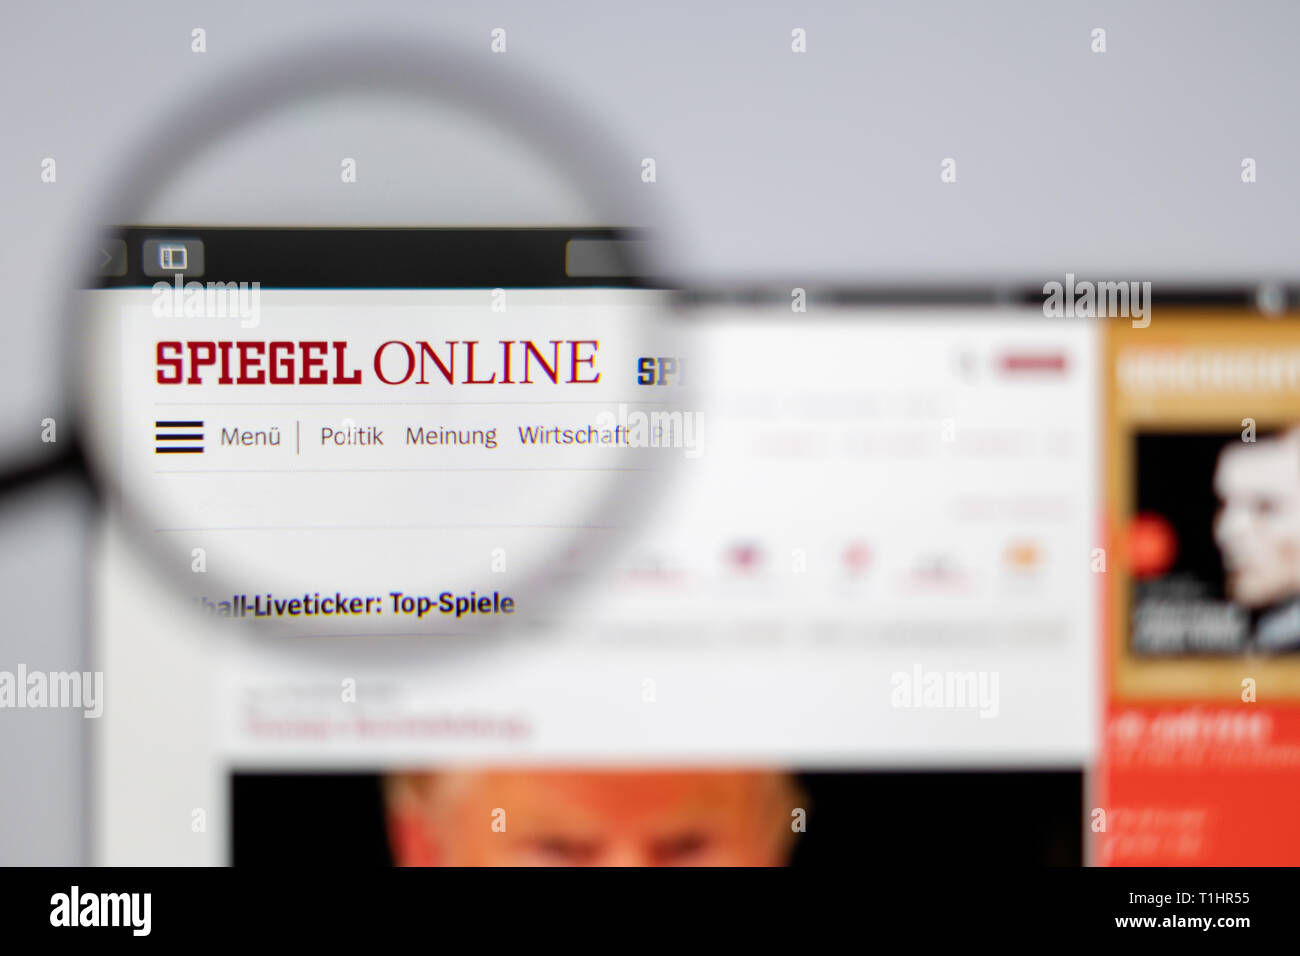 Spiegel Online High Resolution Stock Photography and Images - Alamy